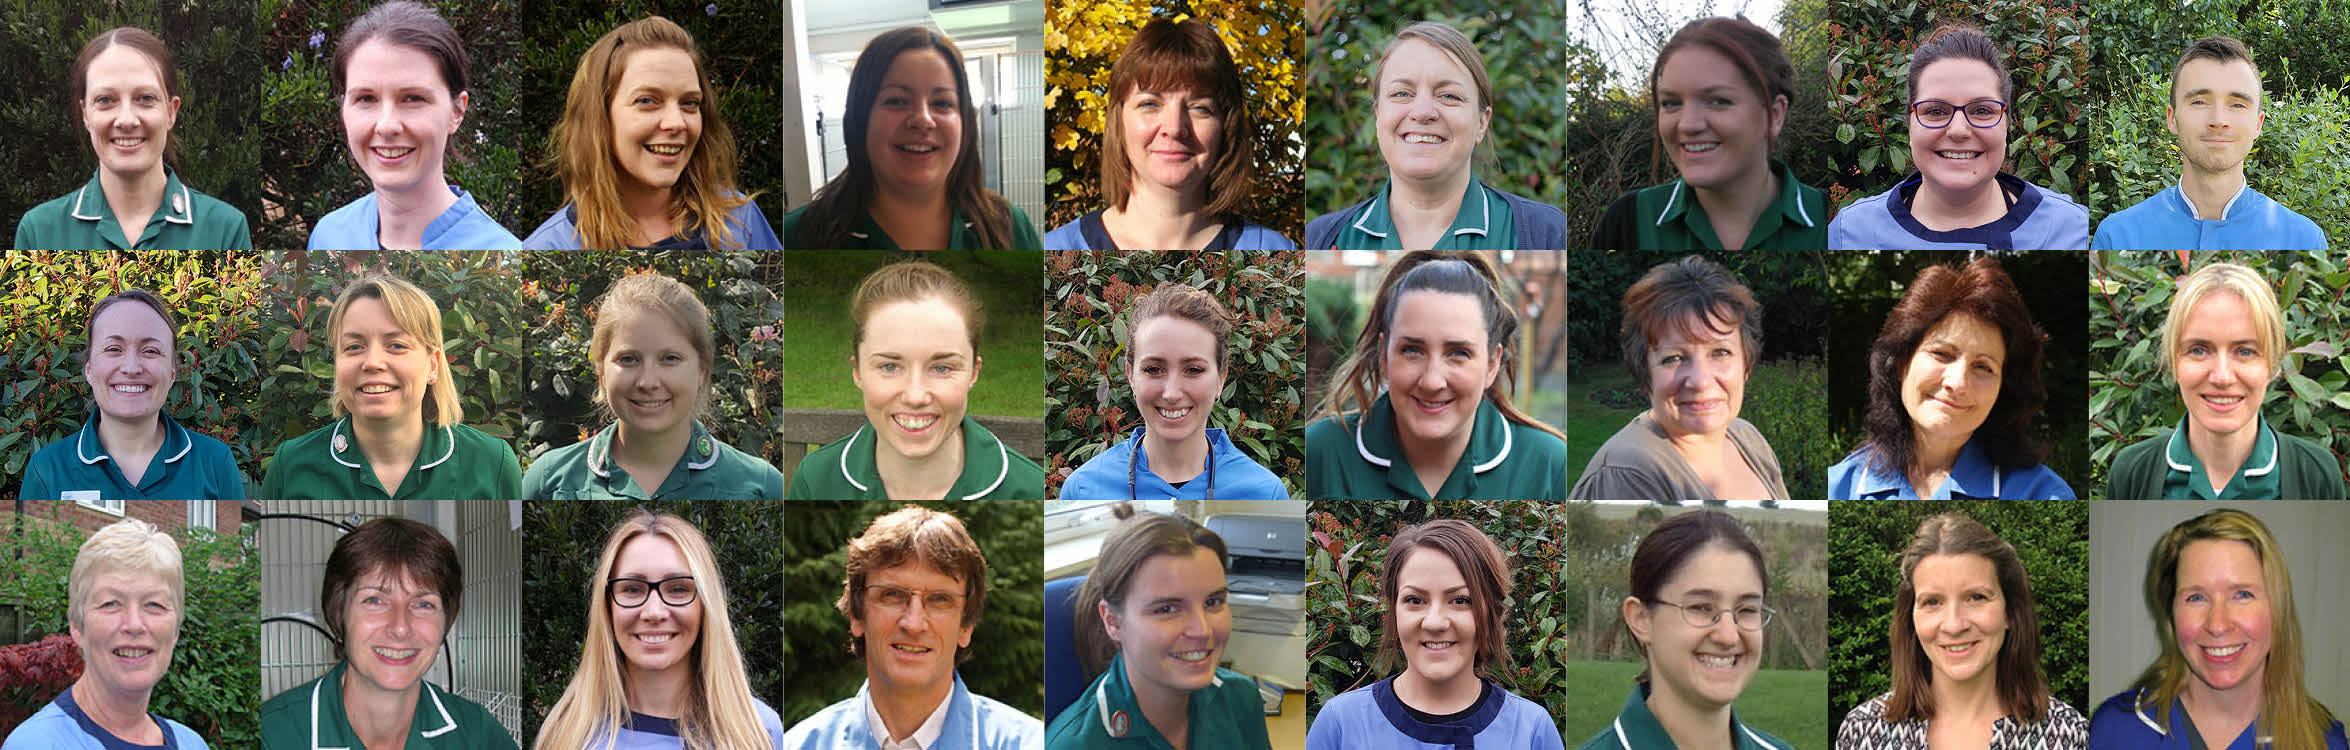 Our friendly and caring team of Fully qualified veterinary surgeons and nurses